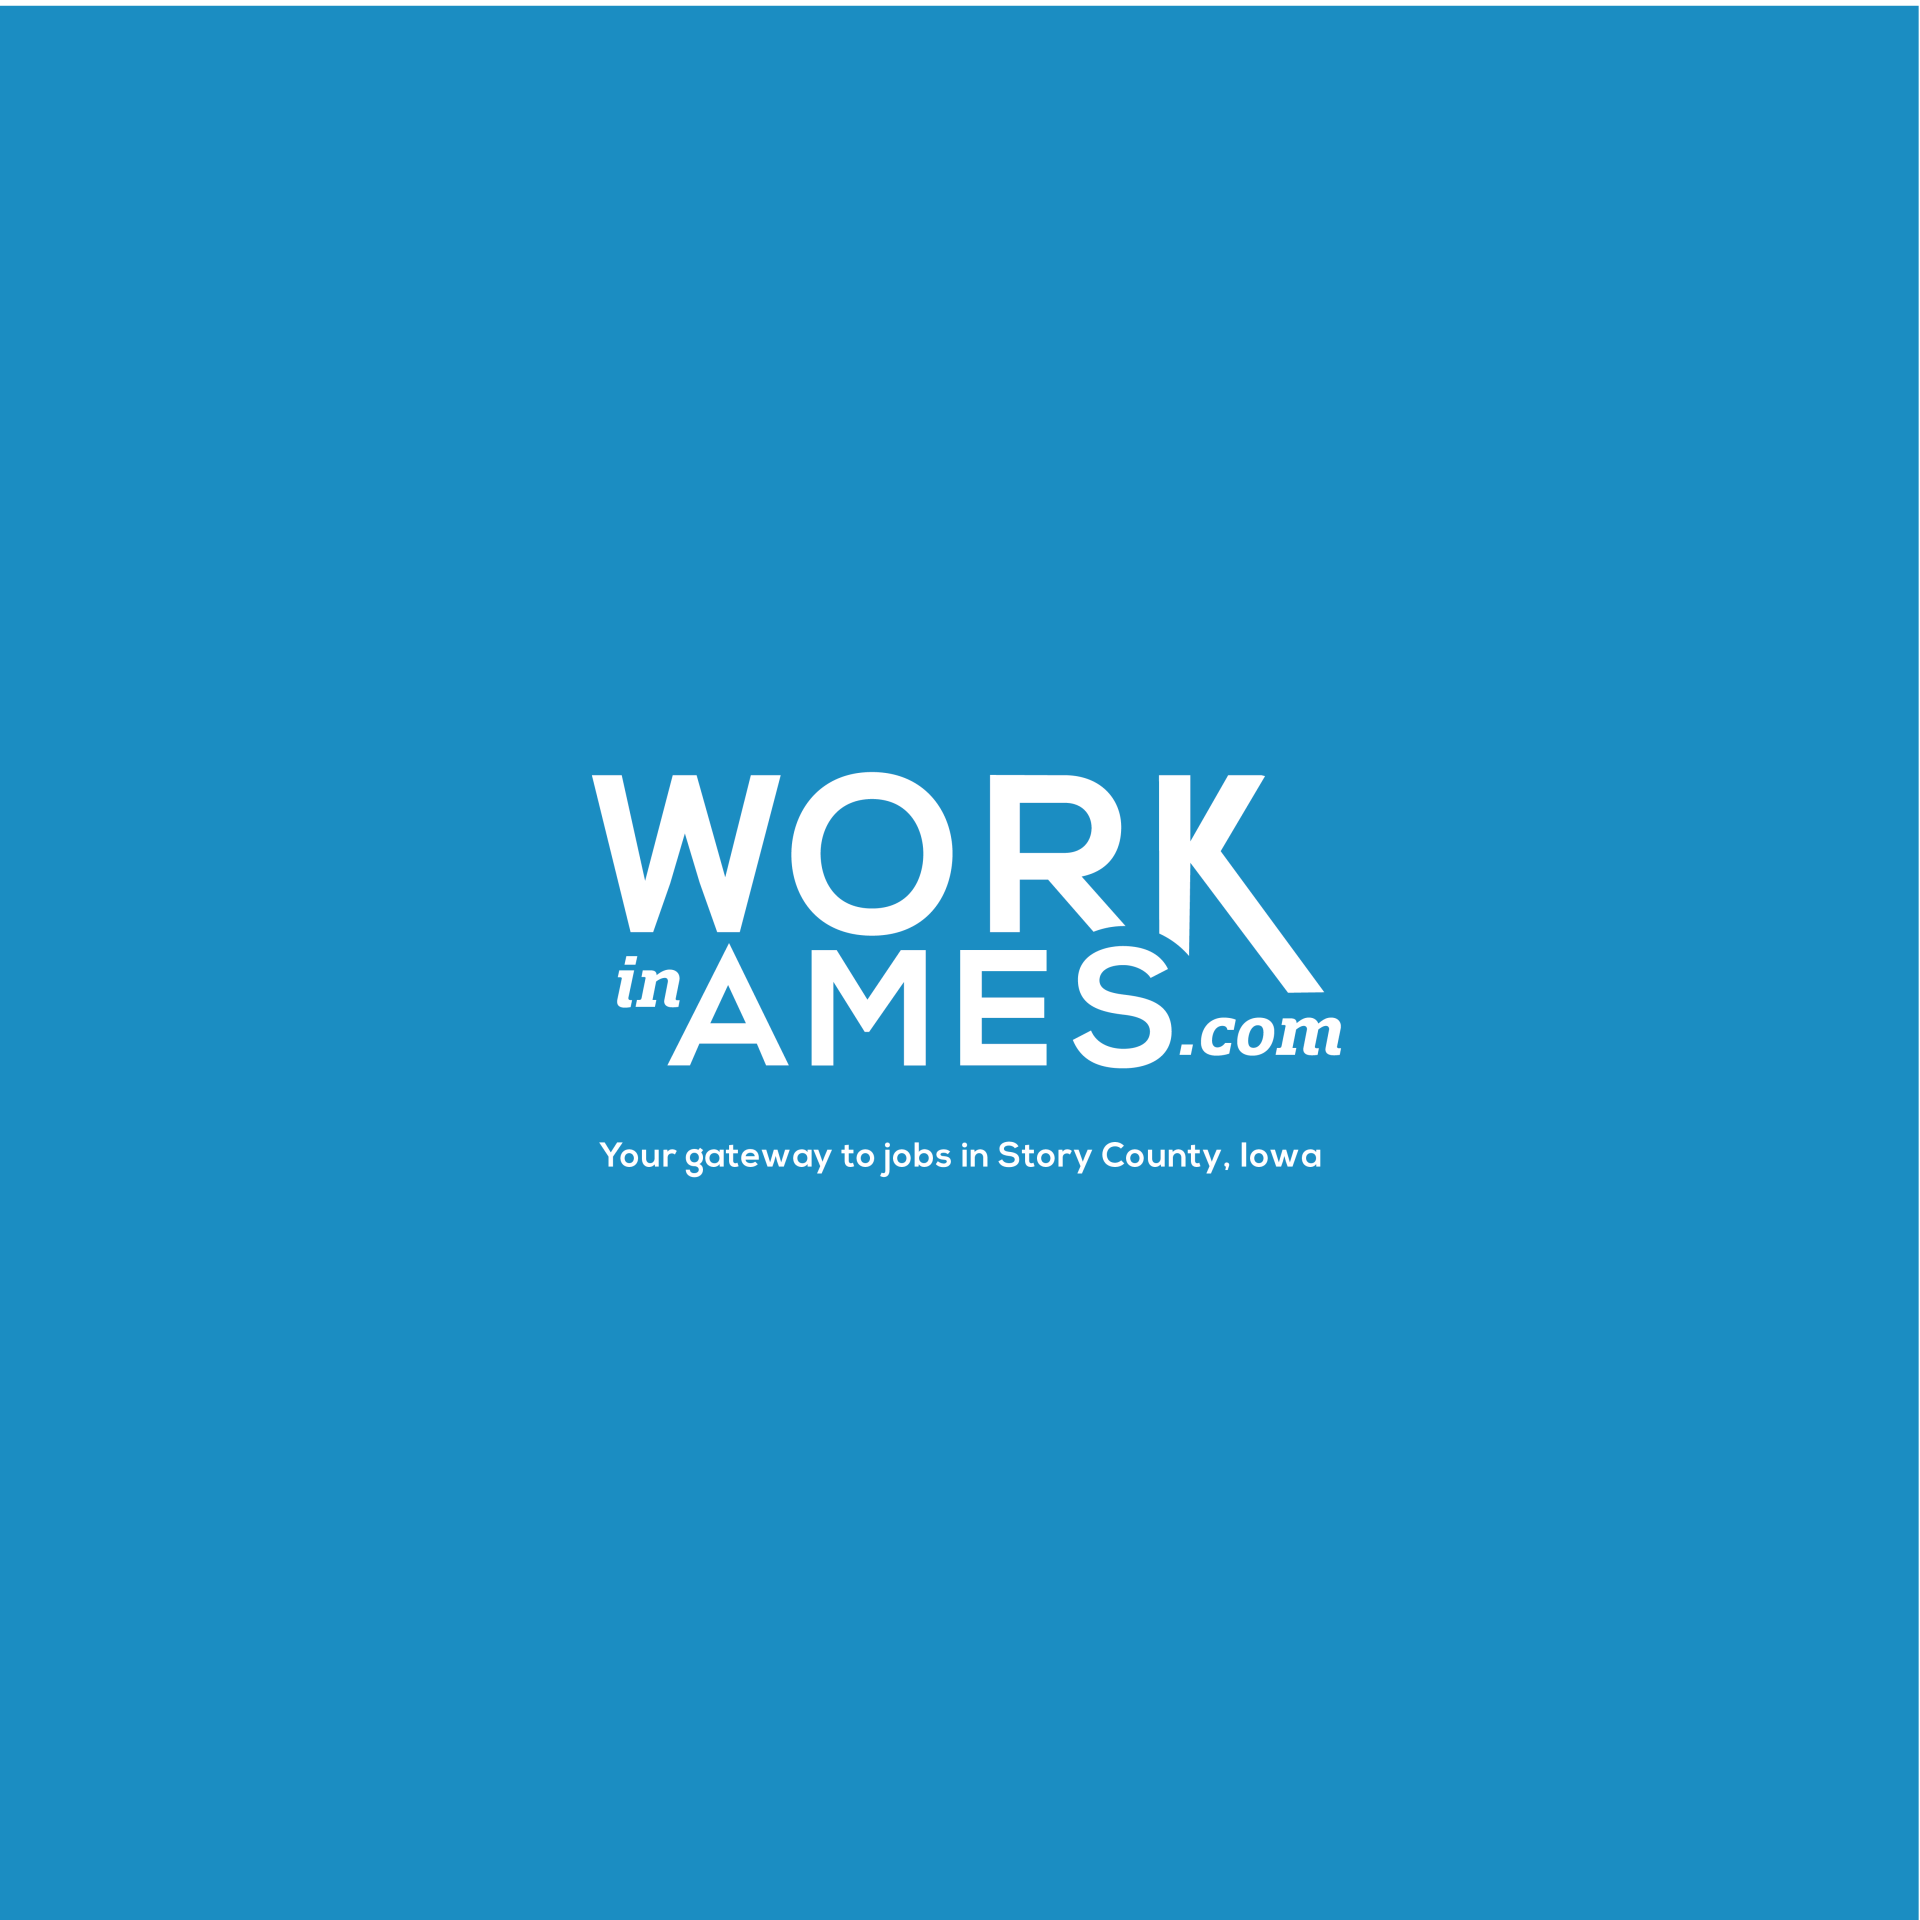 A blue background with the words work in ames.com on it